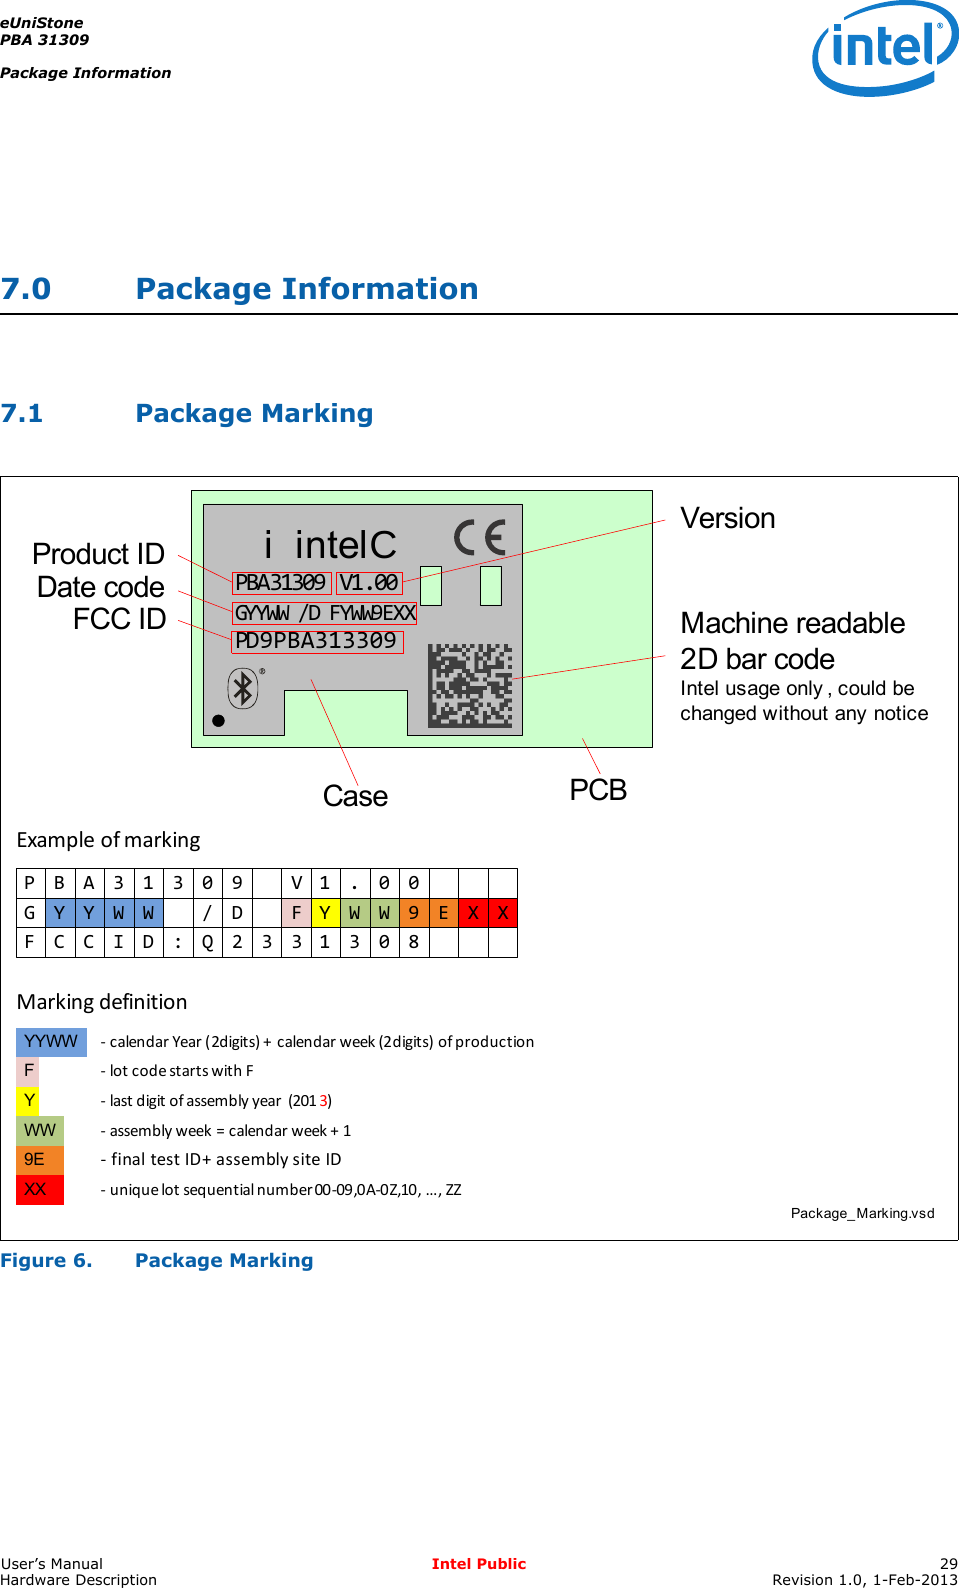 eUniStonePBA 31309Package InformationUser’s Manual Intel Public 29Hardware Description Revision 1.0, 1-Feb-20137.0 Package Information7.1 Package MarkingFigure 6. Package MarkingPackage_Marking.vsdVersionProduct IDFCC ID Machine readable2D bar codeIntel usage only , could be changed without any noticeCase PCBi  intelCGYYWW/DFYWW9EXXPD9PBA313309PBA31309 V1.00Date codeYYWWFYWW9EXX- calendar Year (2digits) +  calendar week (2digits) of production- lot code starts with F- last digit of assembly year  (2013)- assembly week = calendar week + 1- final test ID + assembly site ID- unique lot sequential number 00-09,0A-0Z,10, …, ZZP B A 3 1 3 0 9 V 1 . 0 0G Y Y W W / D F Y W W 9 E X XF C C I D : Q 2 3 3 1 3 0 8Example of markingMarking definition